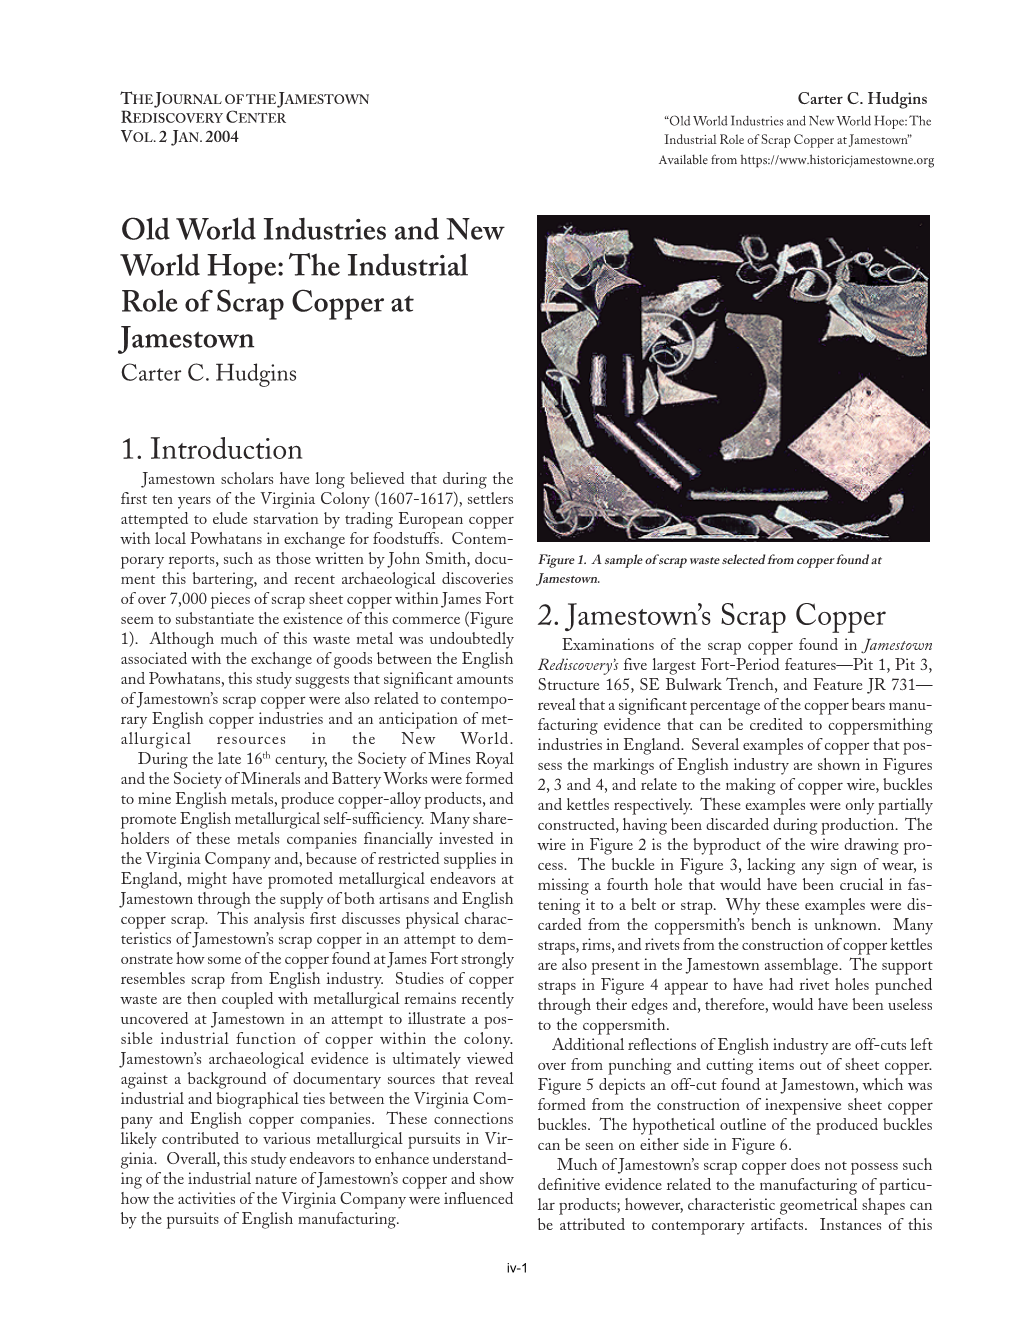 The Industrial Role of Scrap Copper at Jamestown Carter C